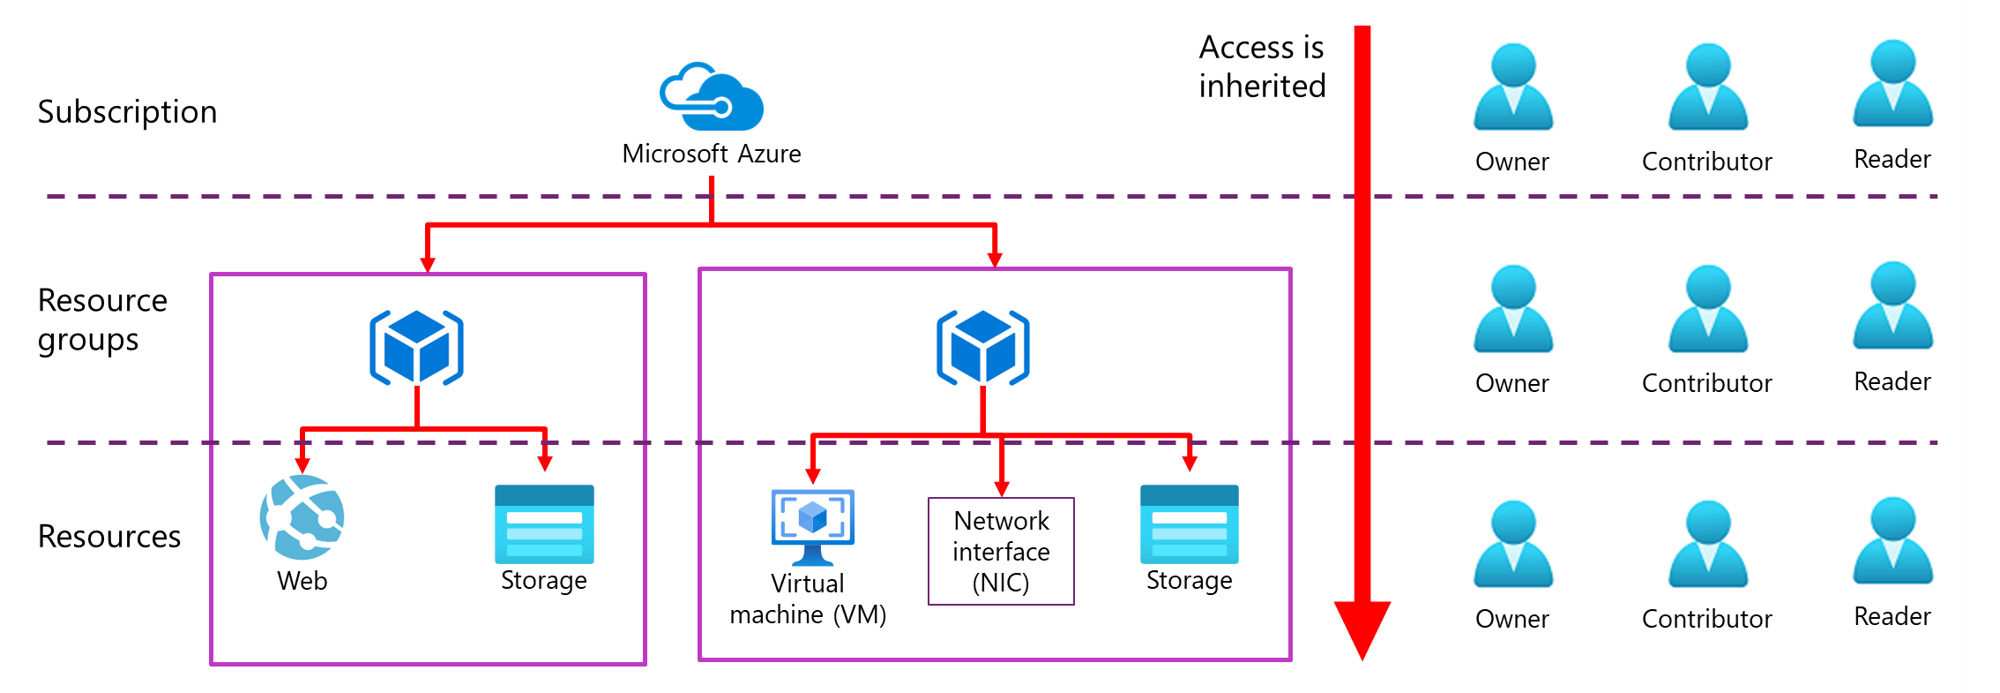 Diagram showing architecture of role-based access control across subscription, resource groups, and resources.